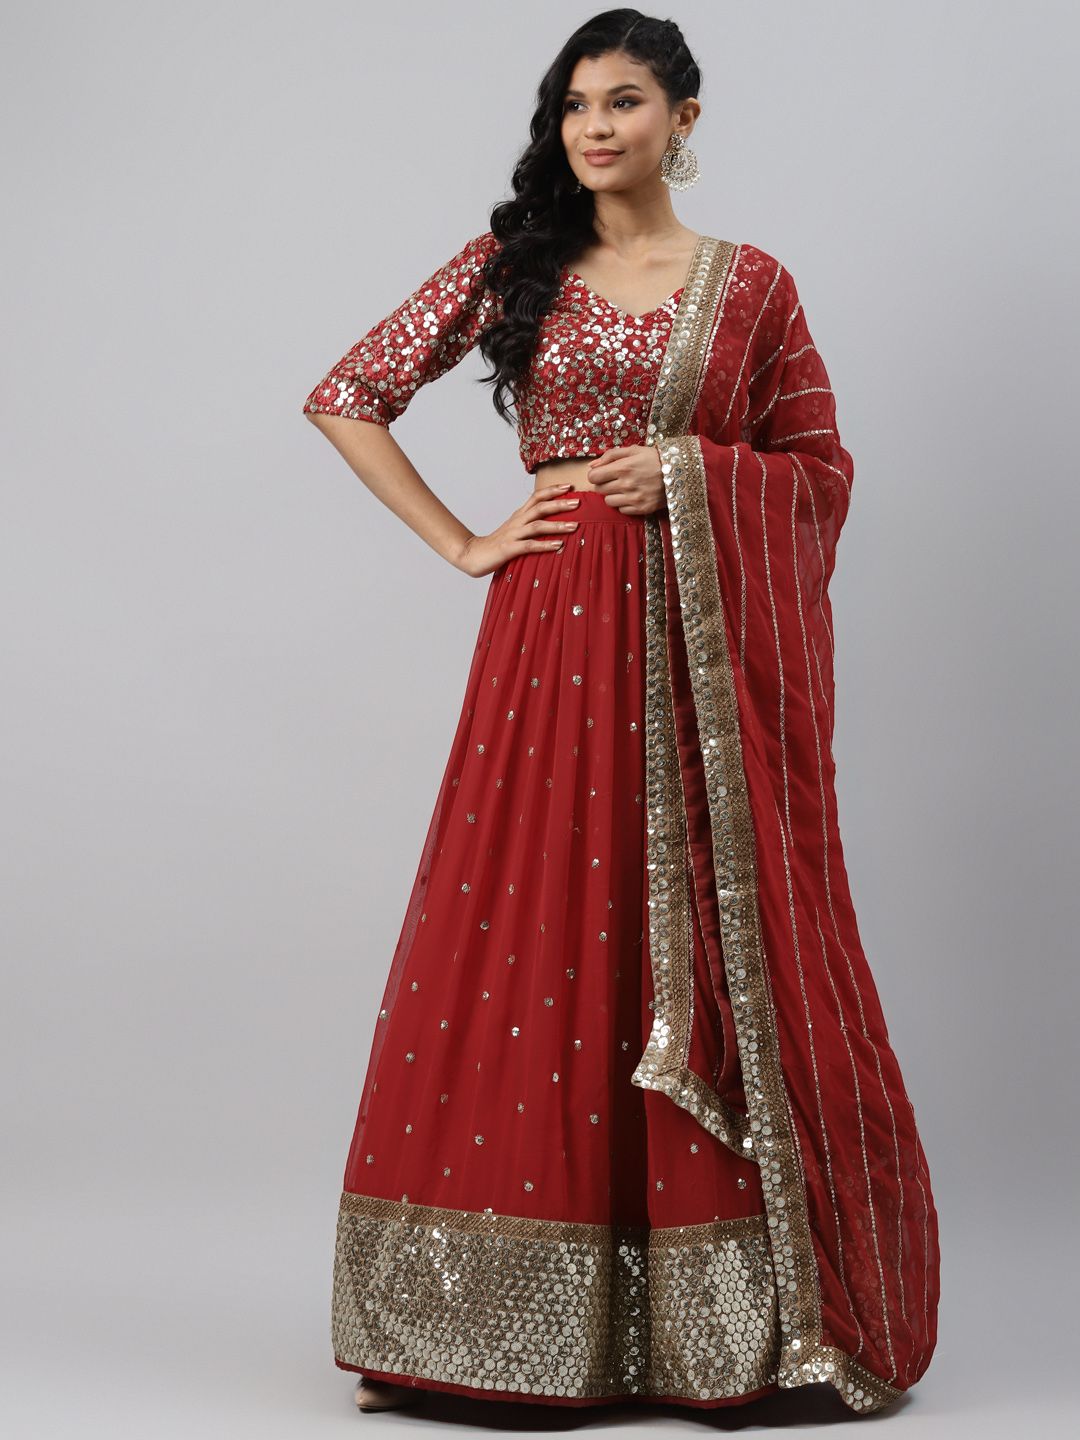 Readiprint Fashions Red & Gold-Toned Embellished Semi-Stitched Lehenga & Unstitched Blouse with Dupatta Price in India